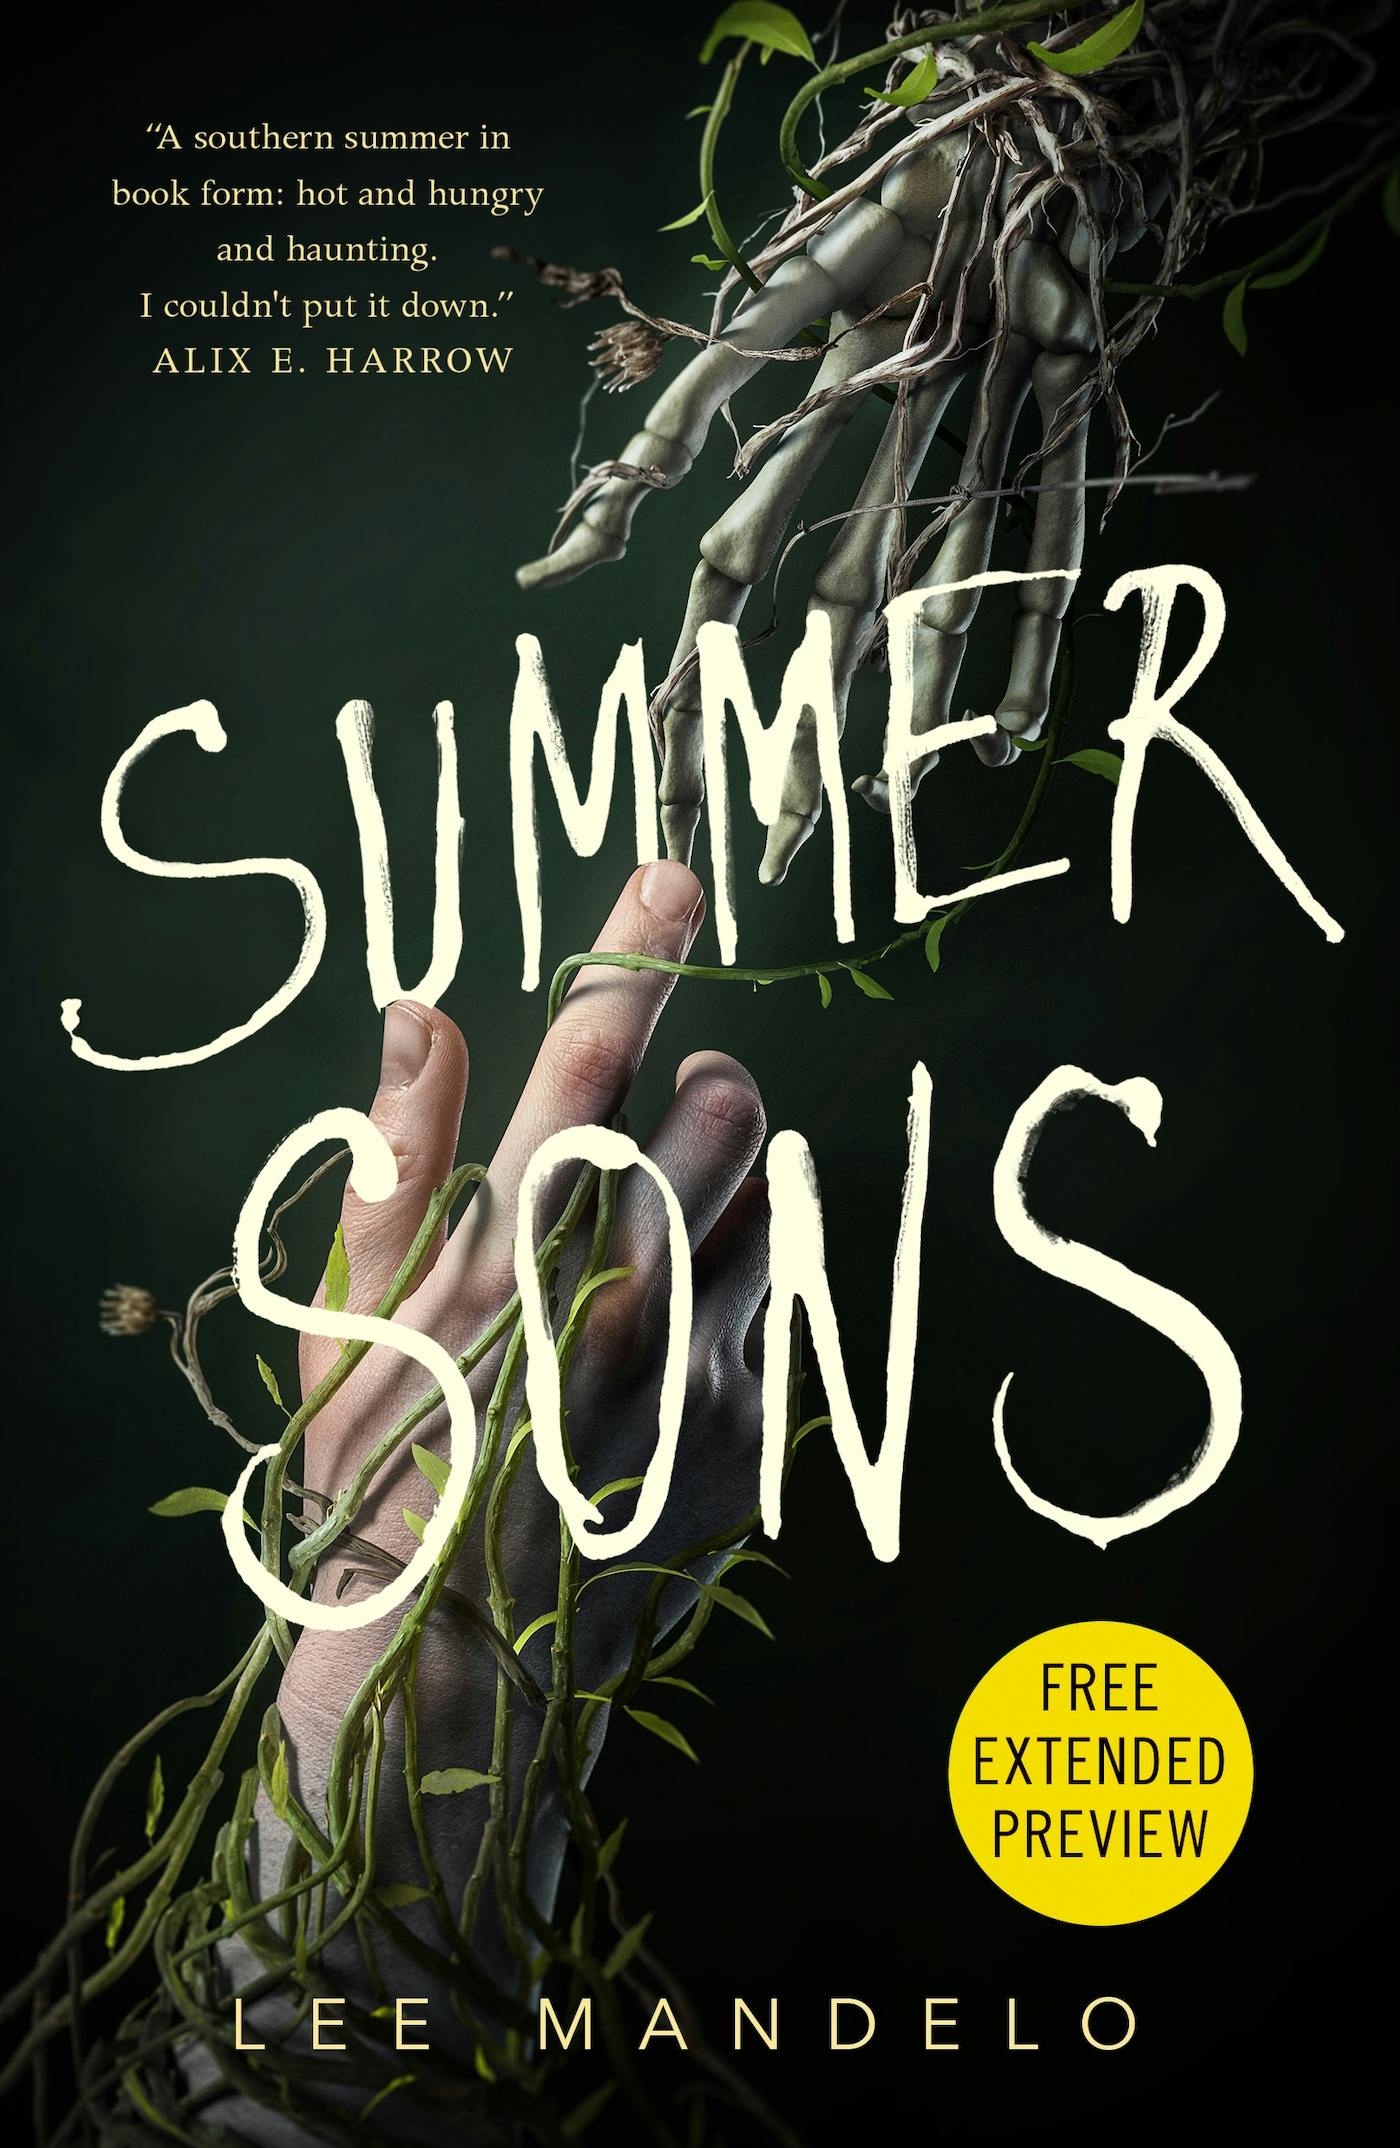 Cover for the book titled as: Summer Sons Sneak Peek